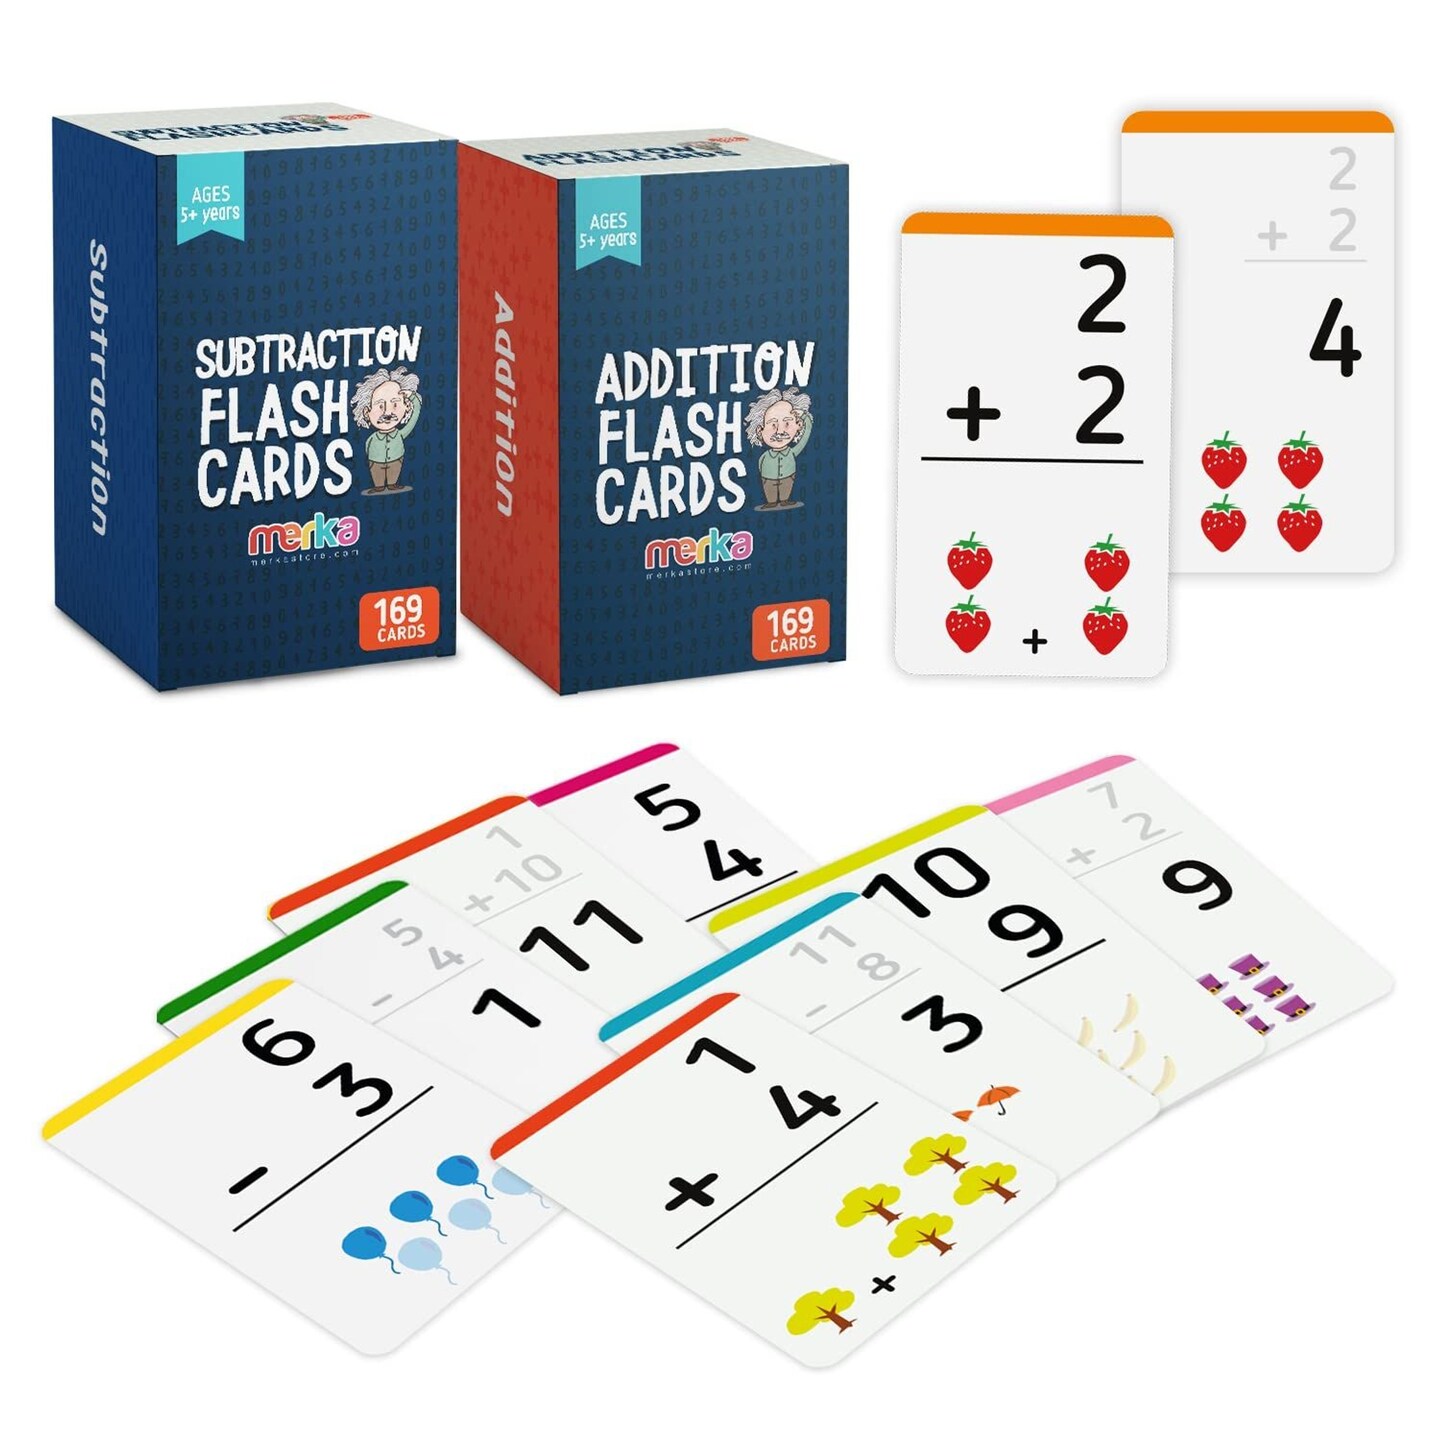 merka Educational Math Flash Cards: Learning &#x26; Toy Card Game for Kids, Mastering Mathematics, For Classroom &#x26; Homeschool Use, 2 Sets with 169 Cards Each, For 1st to 4th Graders, Addition &#x26; Subtraction